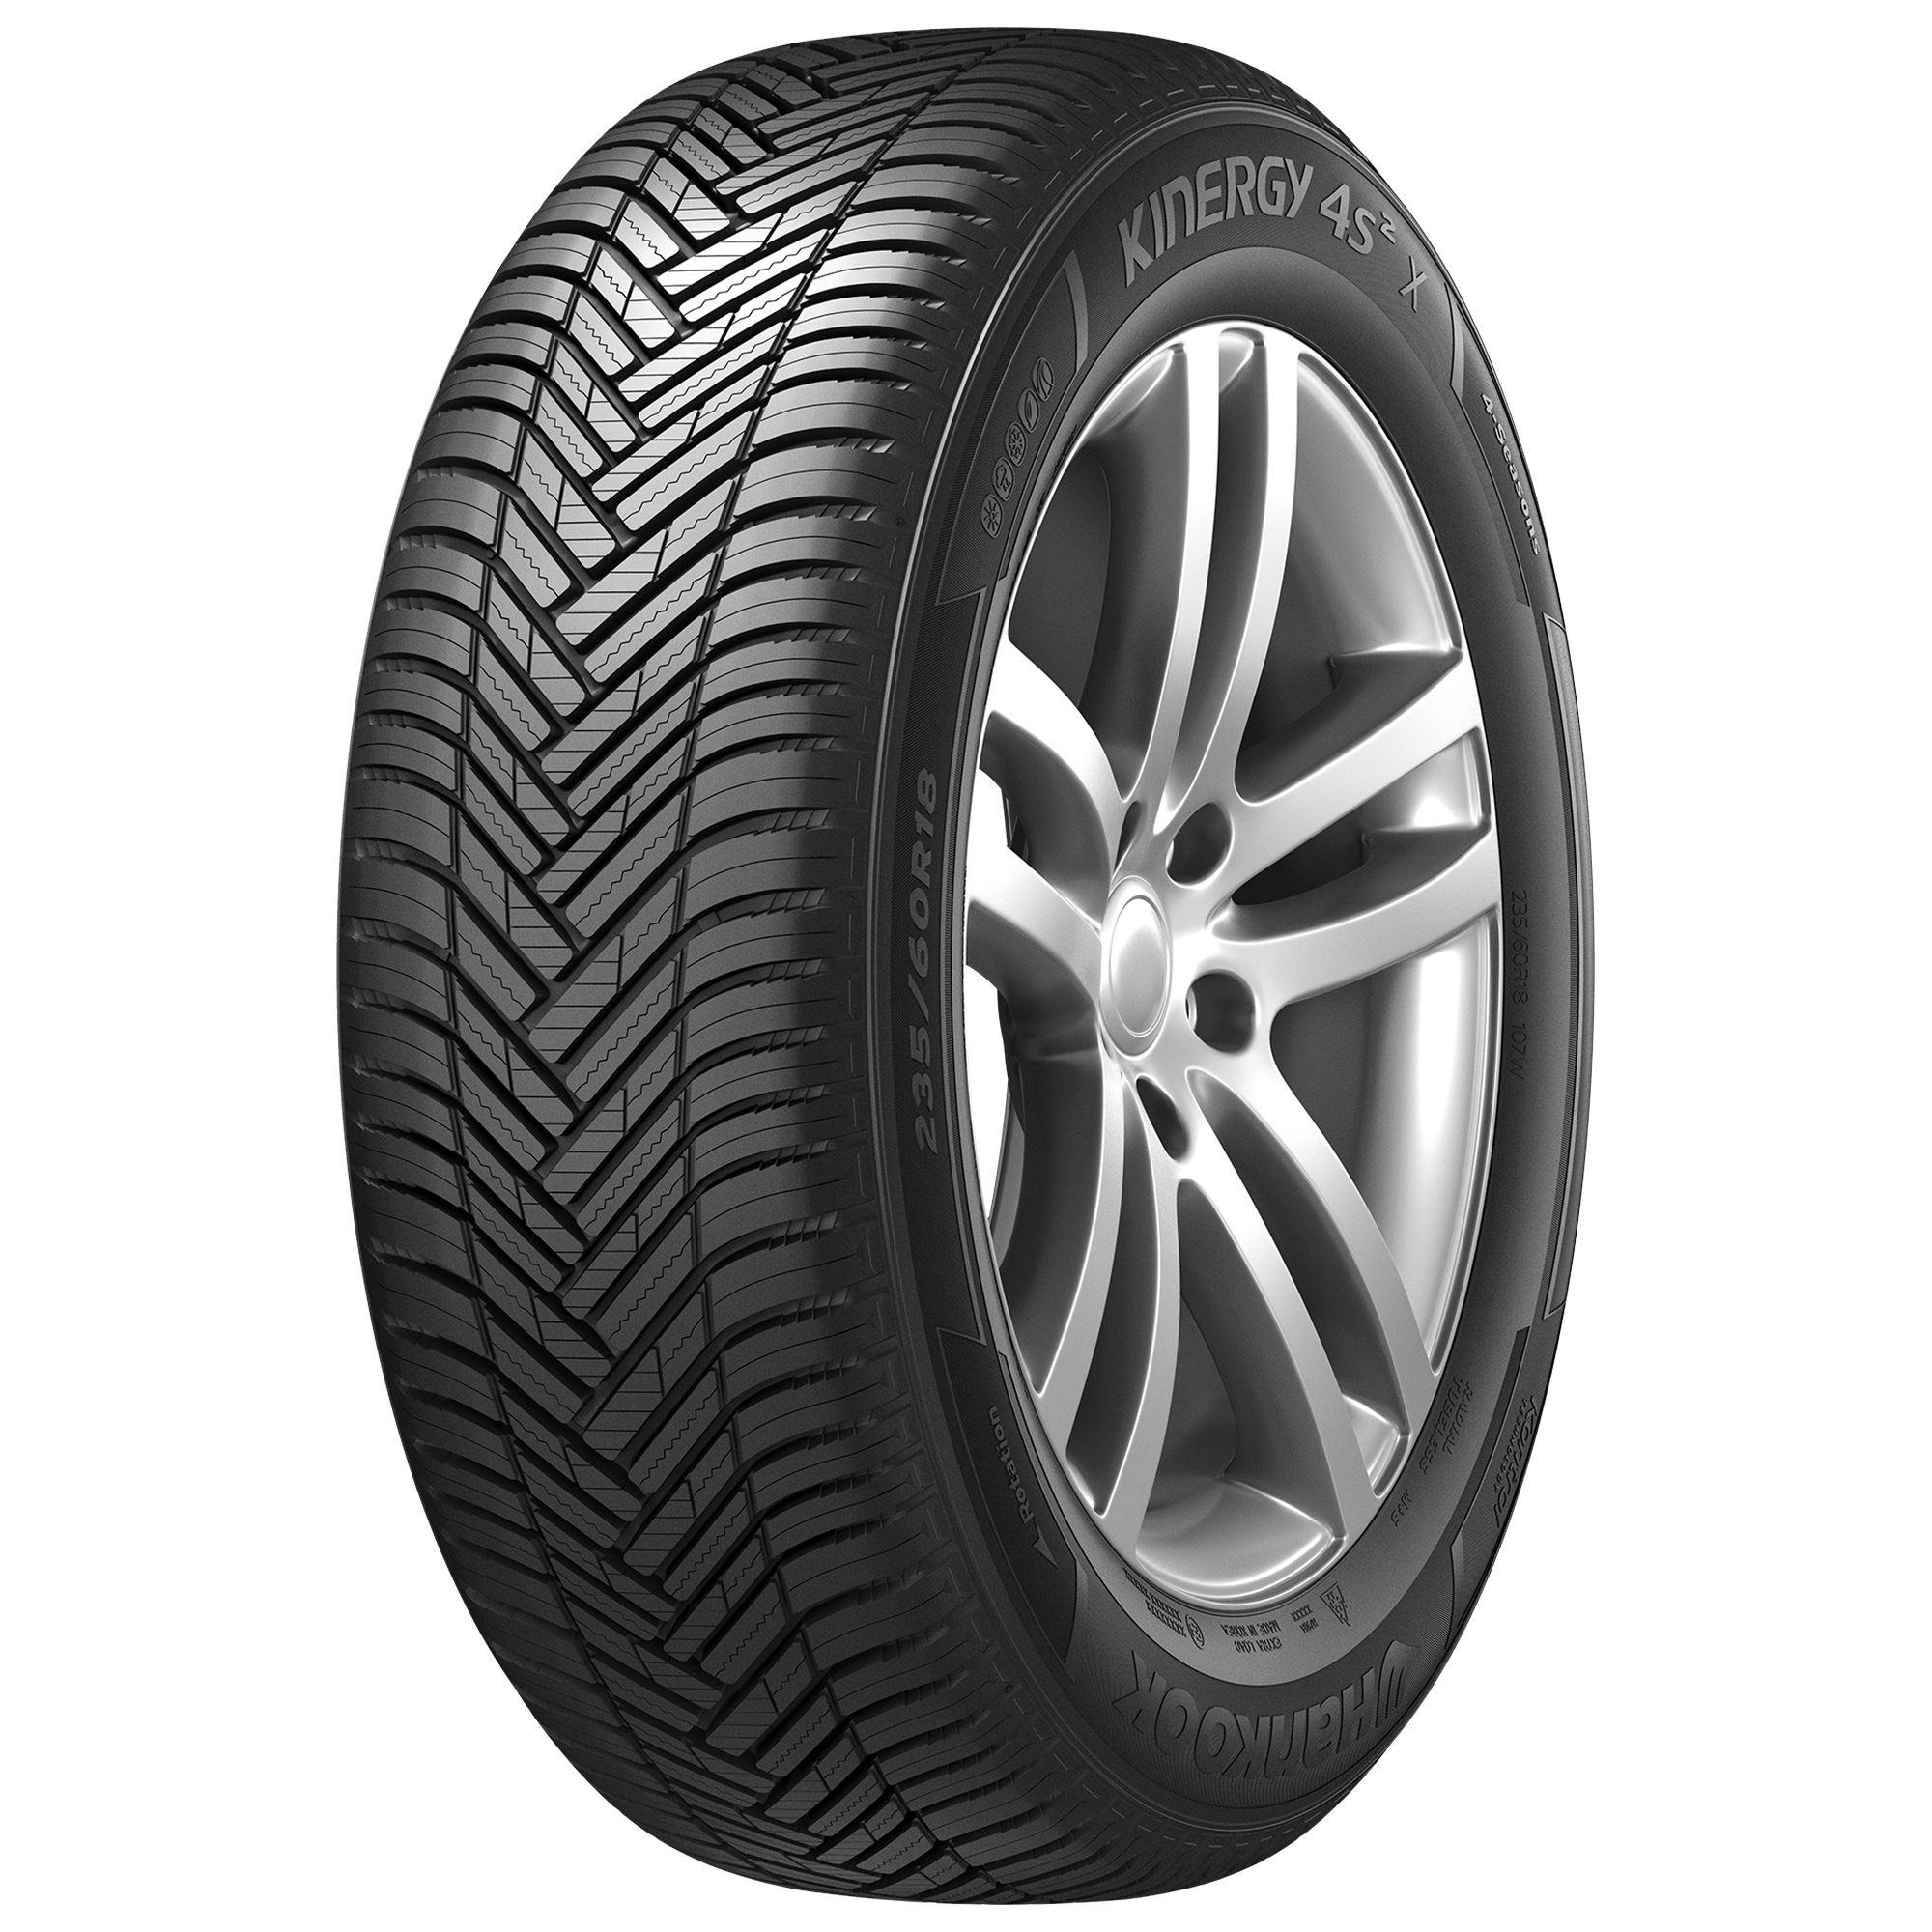 HANKOOK KINERGY 4S 2 X (H750A) 235/65R17 108V BSW